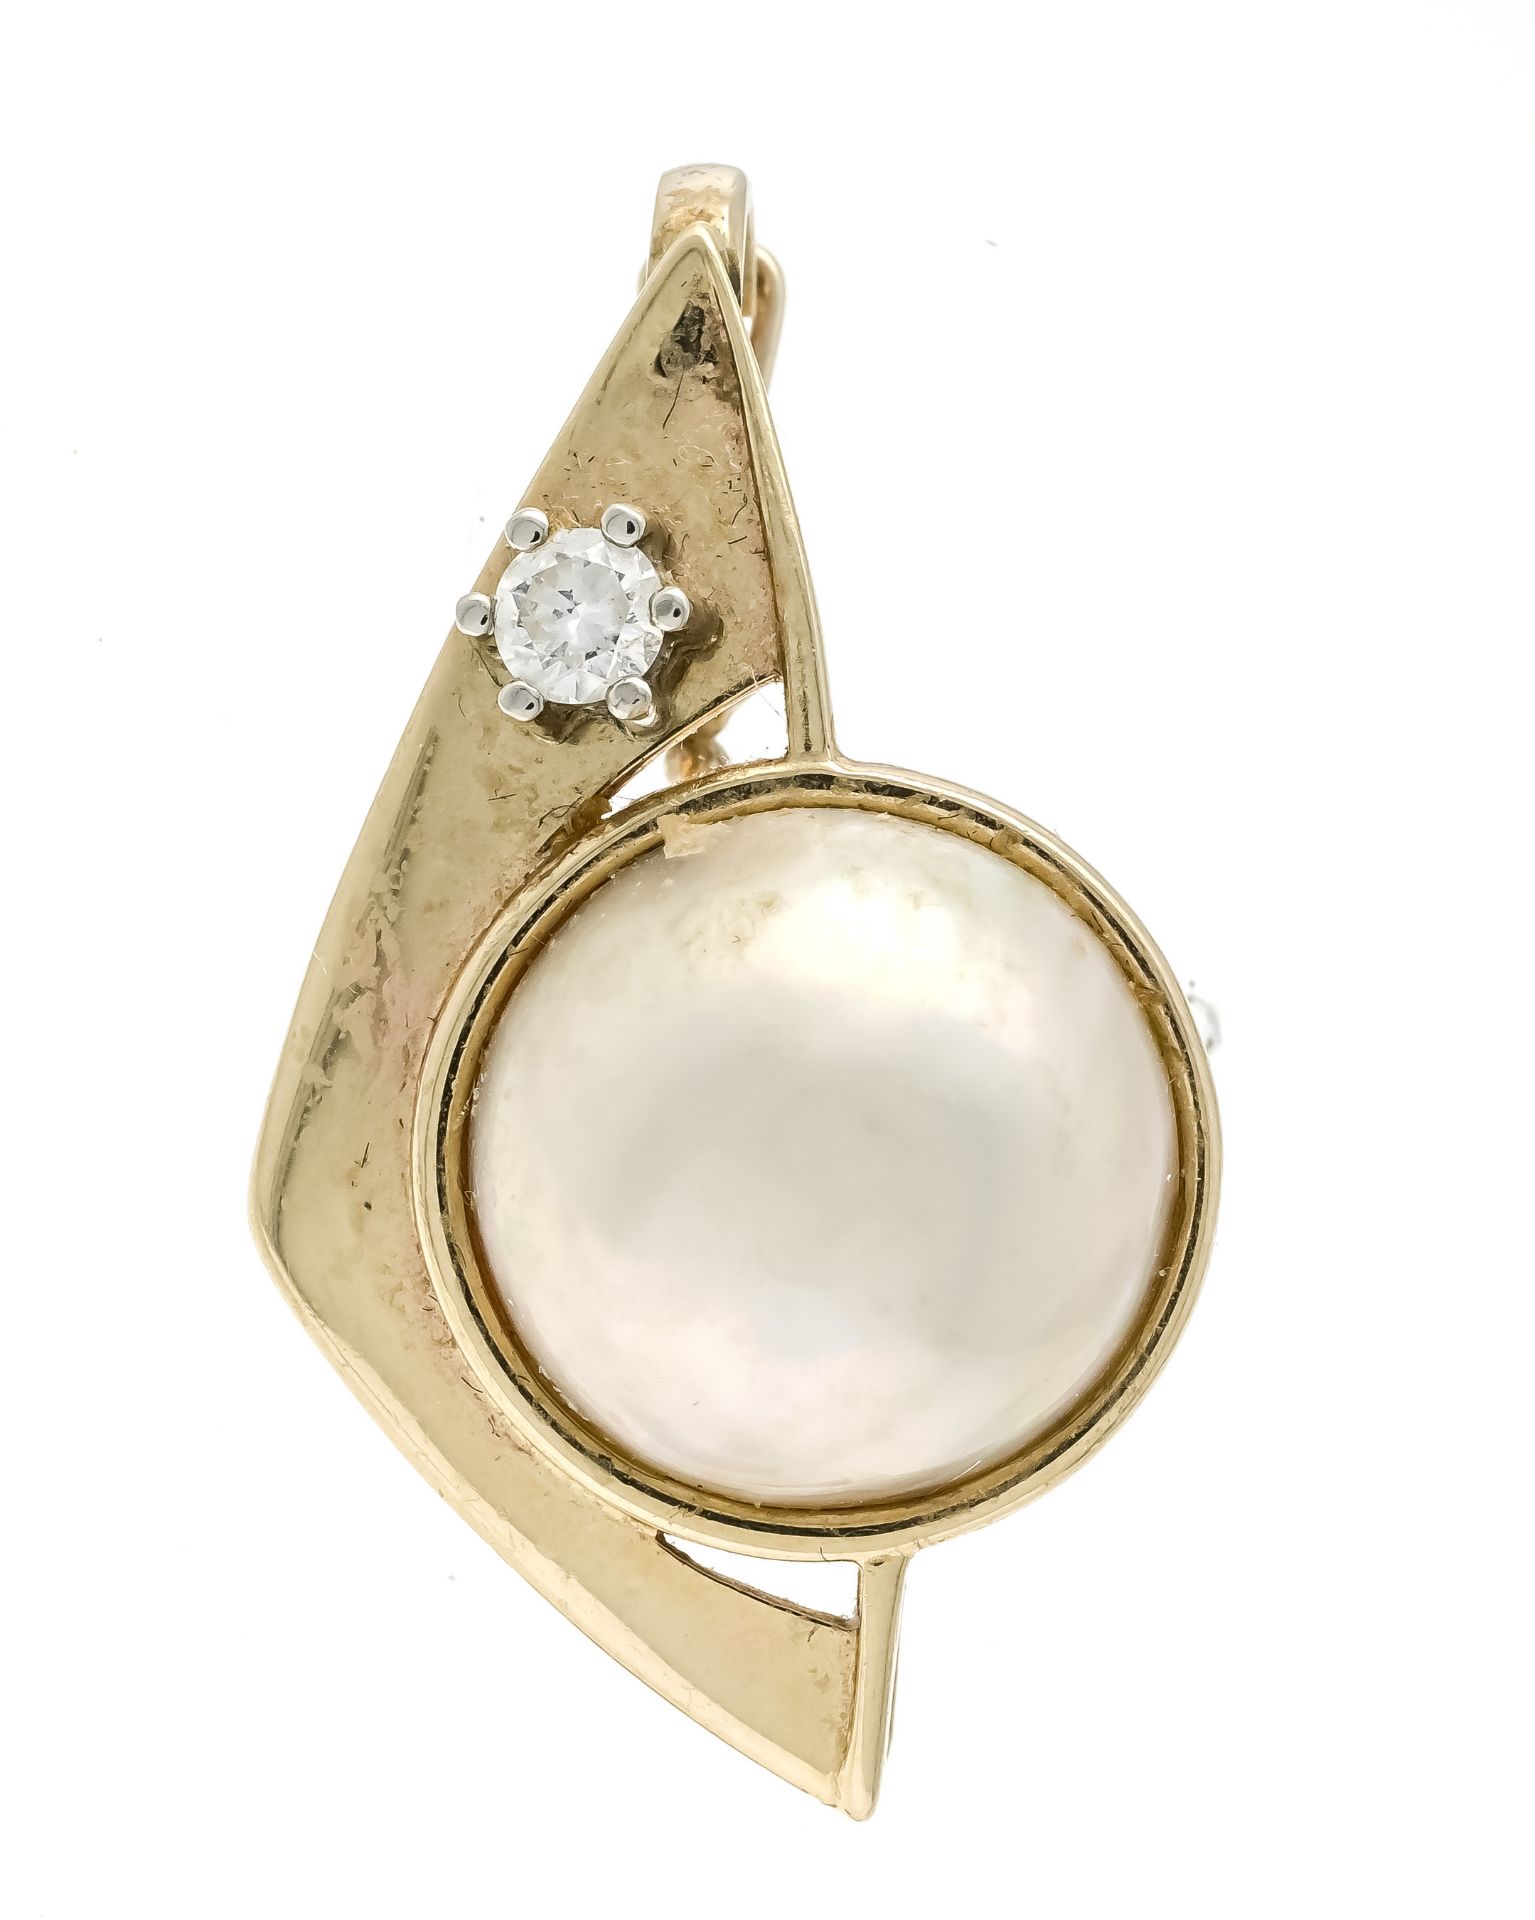 Mabé pearl clip pendant GG/WG 585/000 with a creamy white mabé pearl 15.2 mm and a brioll diamond,